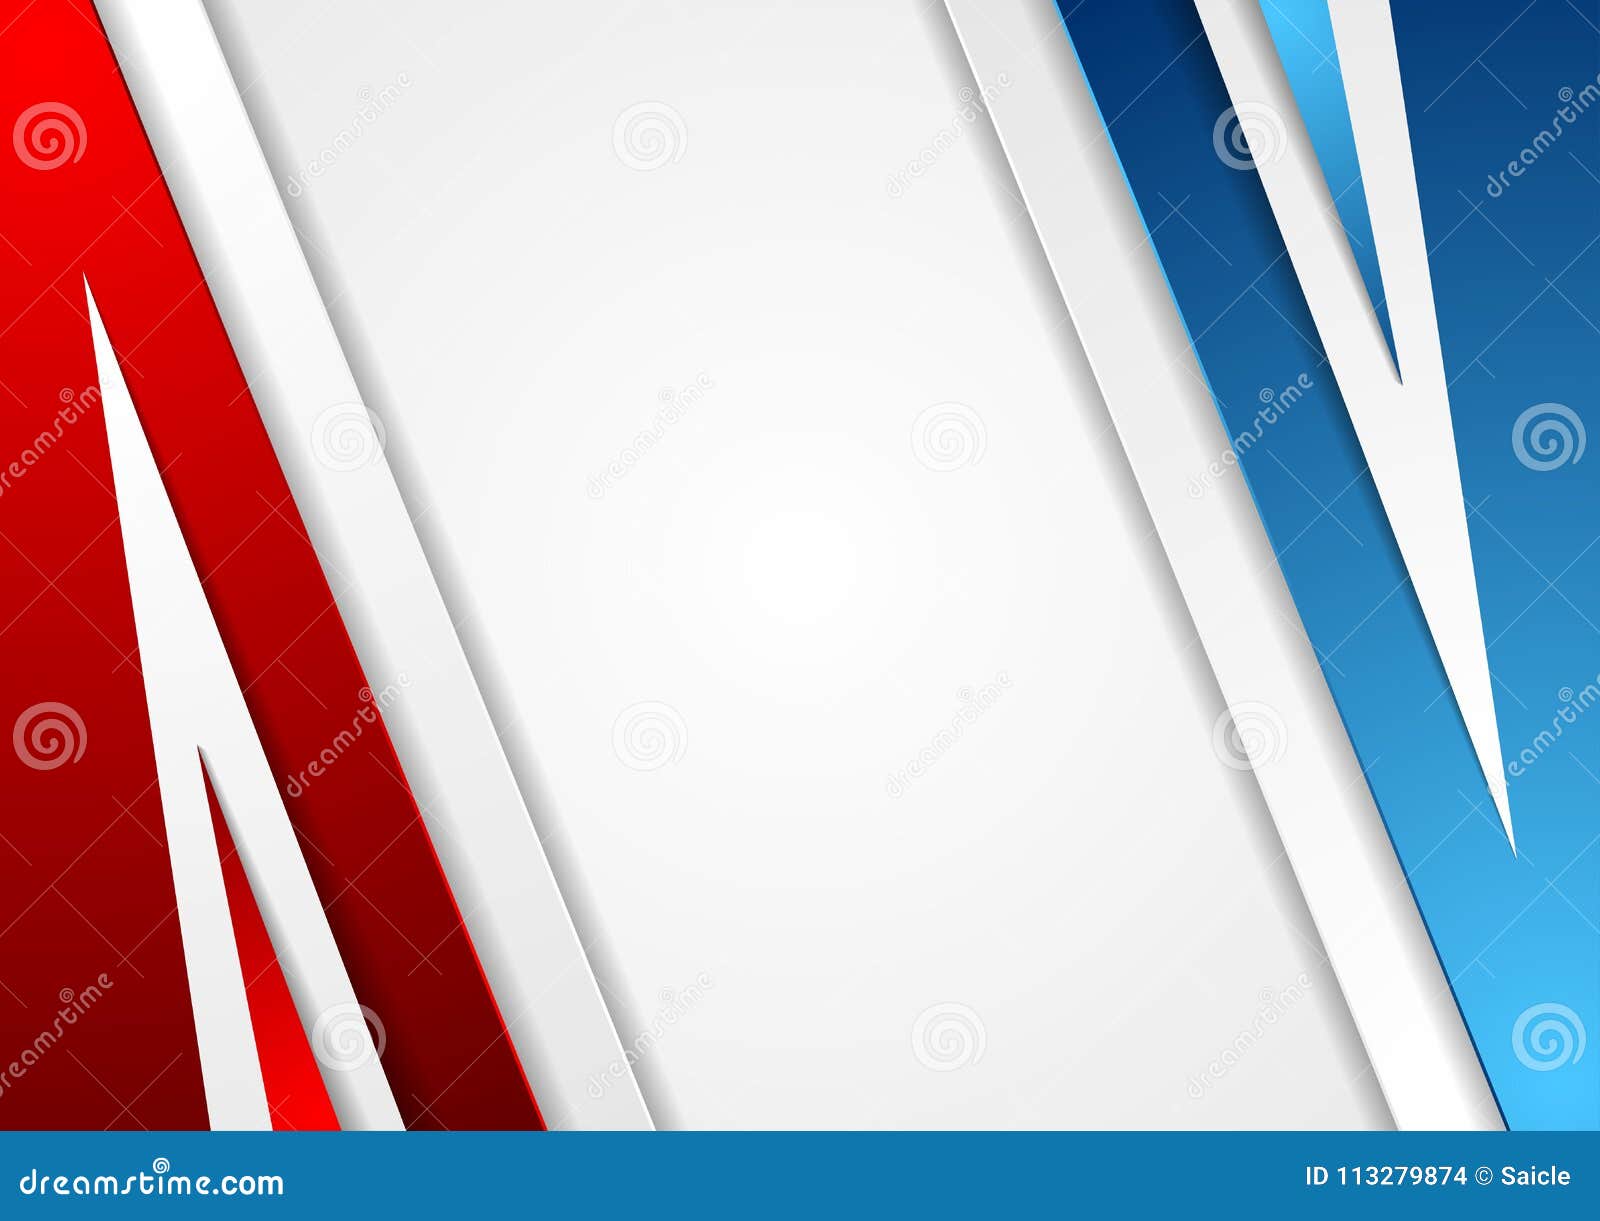 Unduh 850 Background Blue And Red HD Terbaik